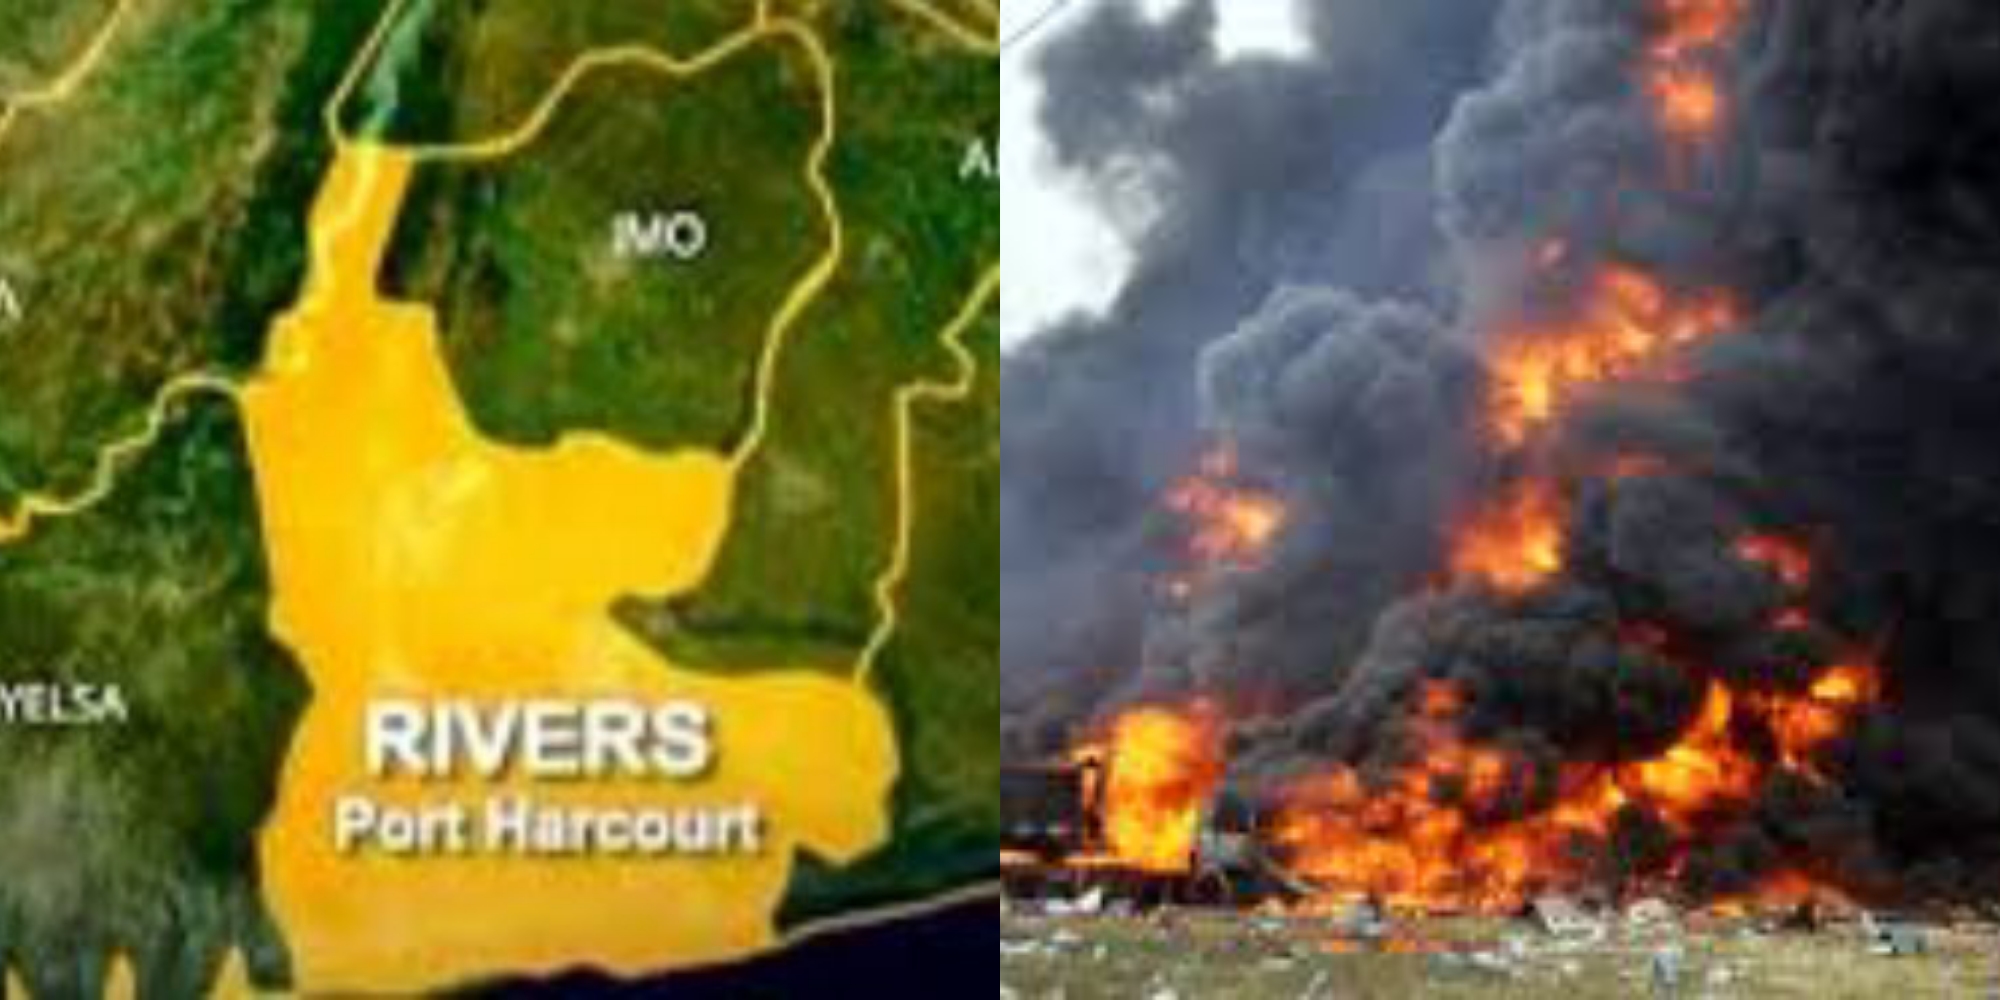 Rivers TV and Radio Stations Hit by Explosions and Gunfire